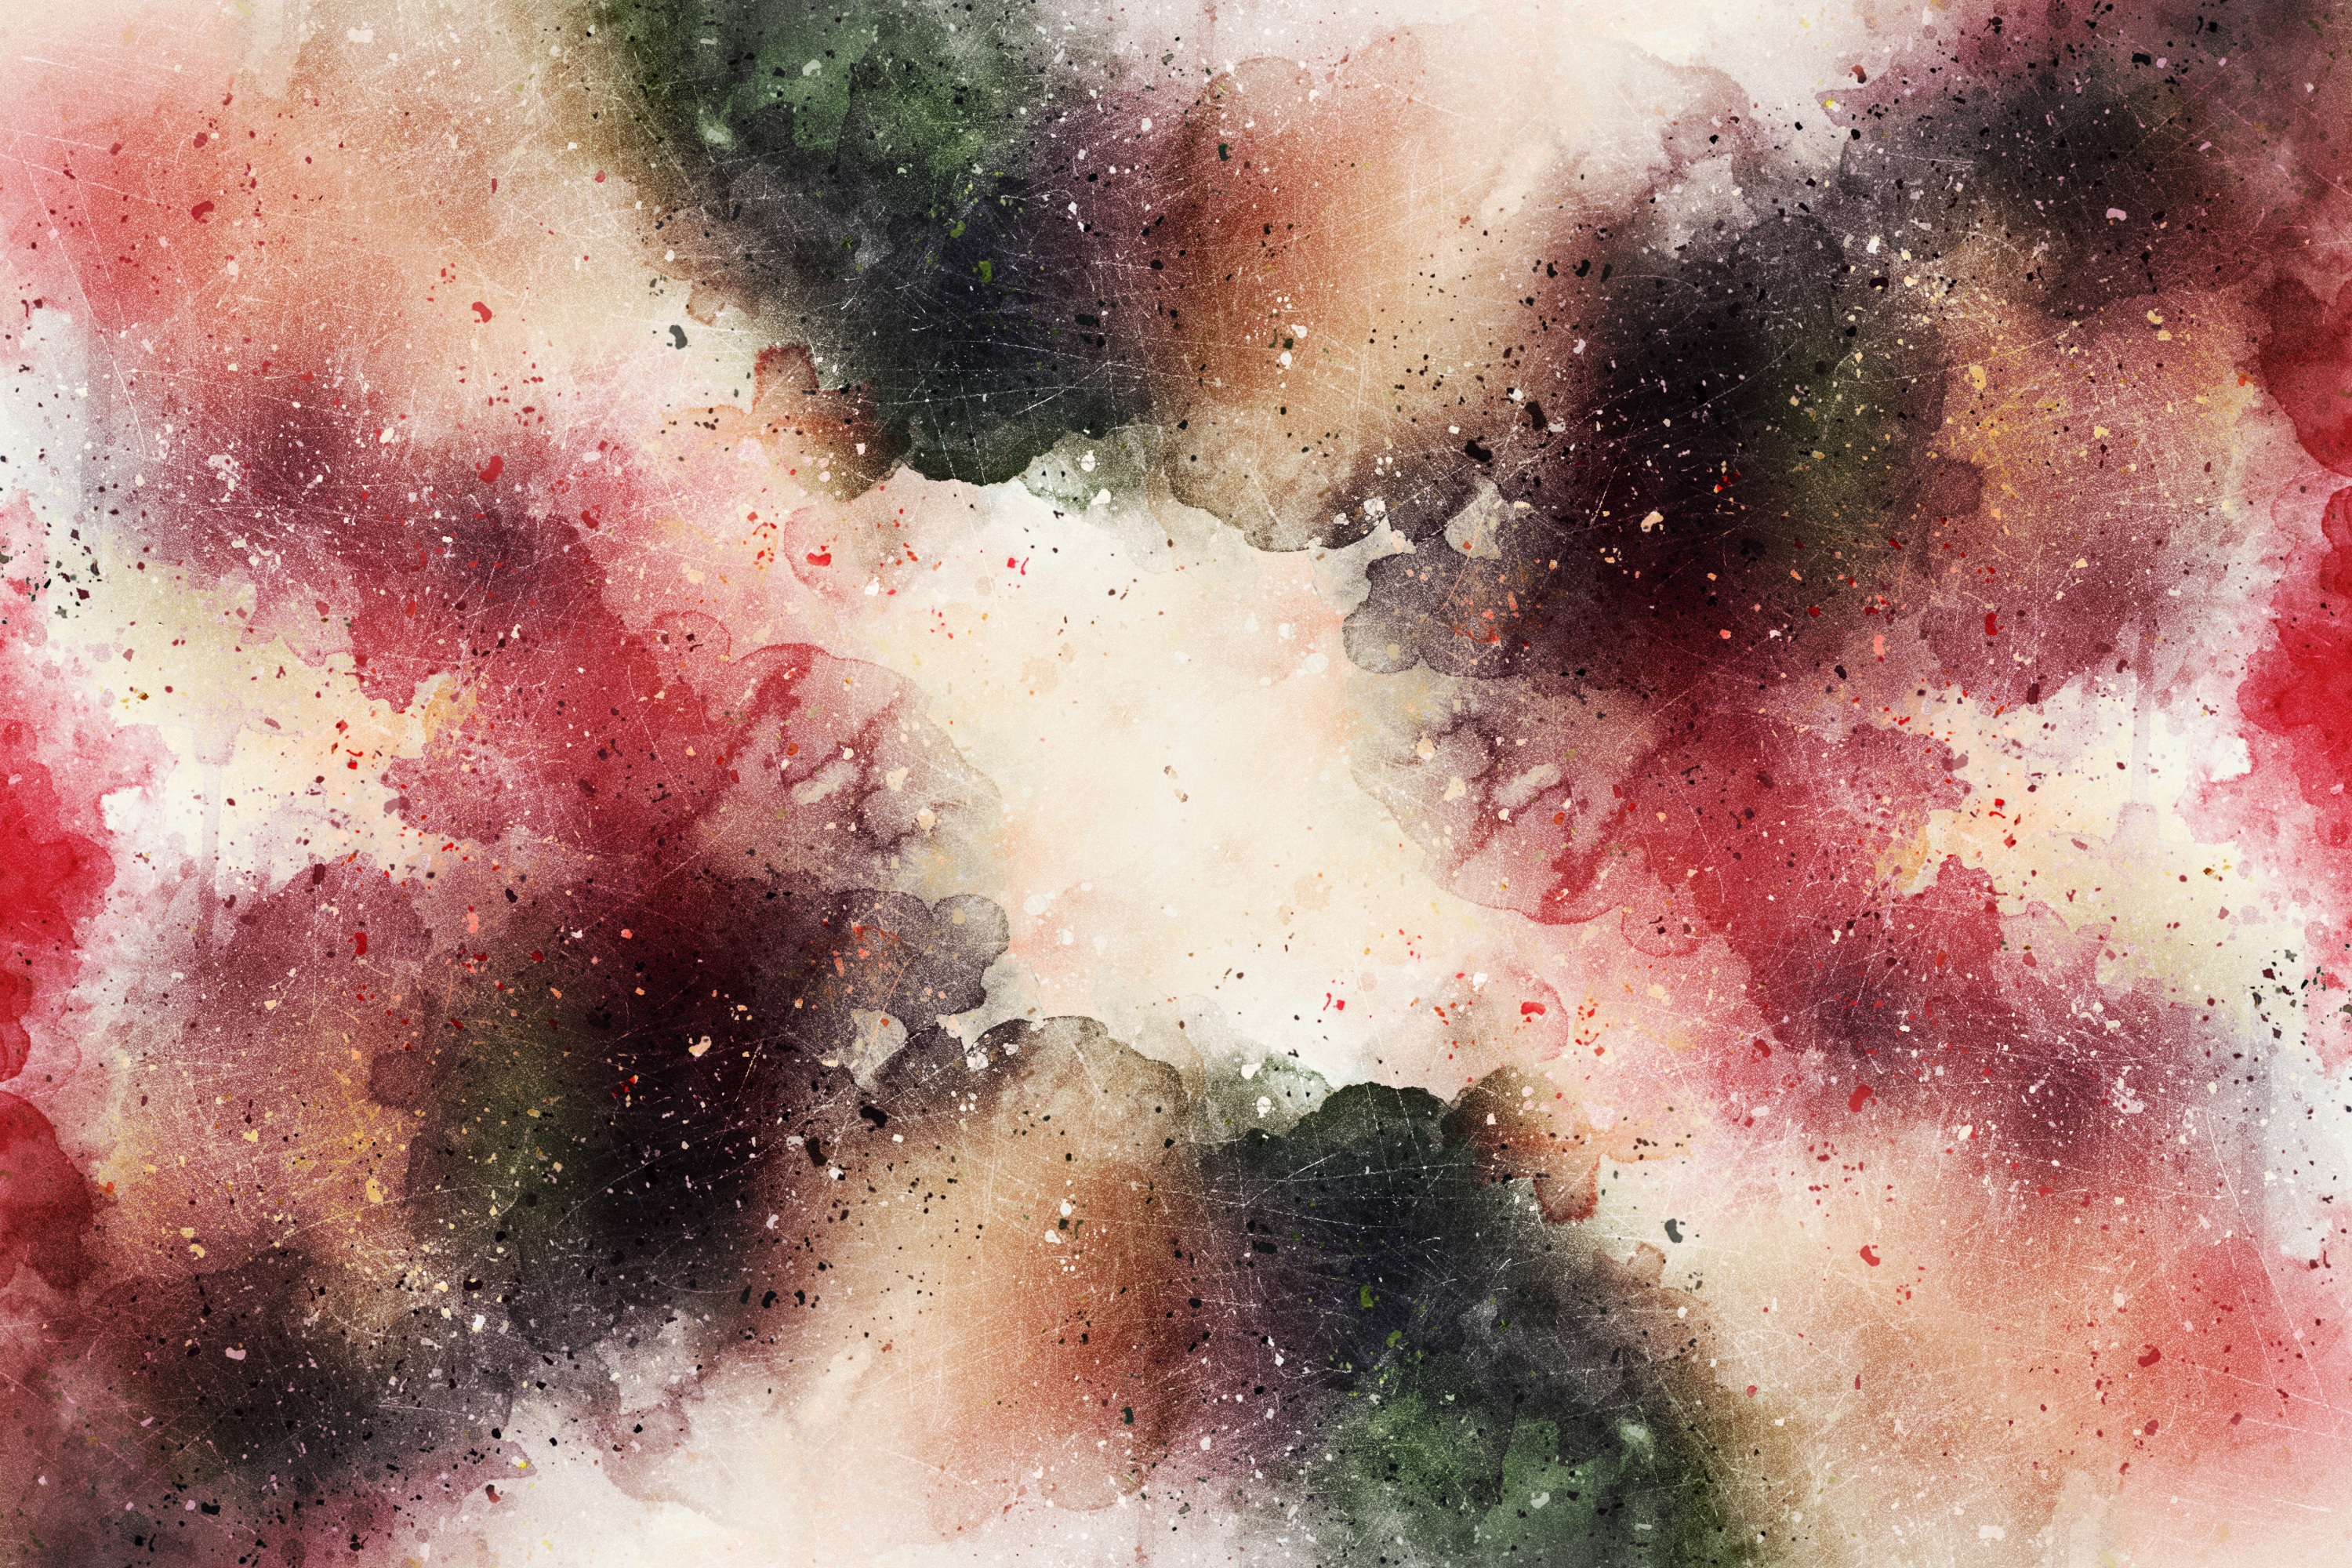 Full HD stains, spots, abstract, watercolor